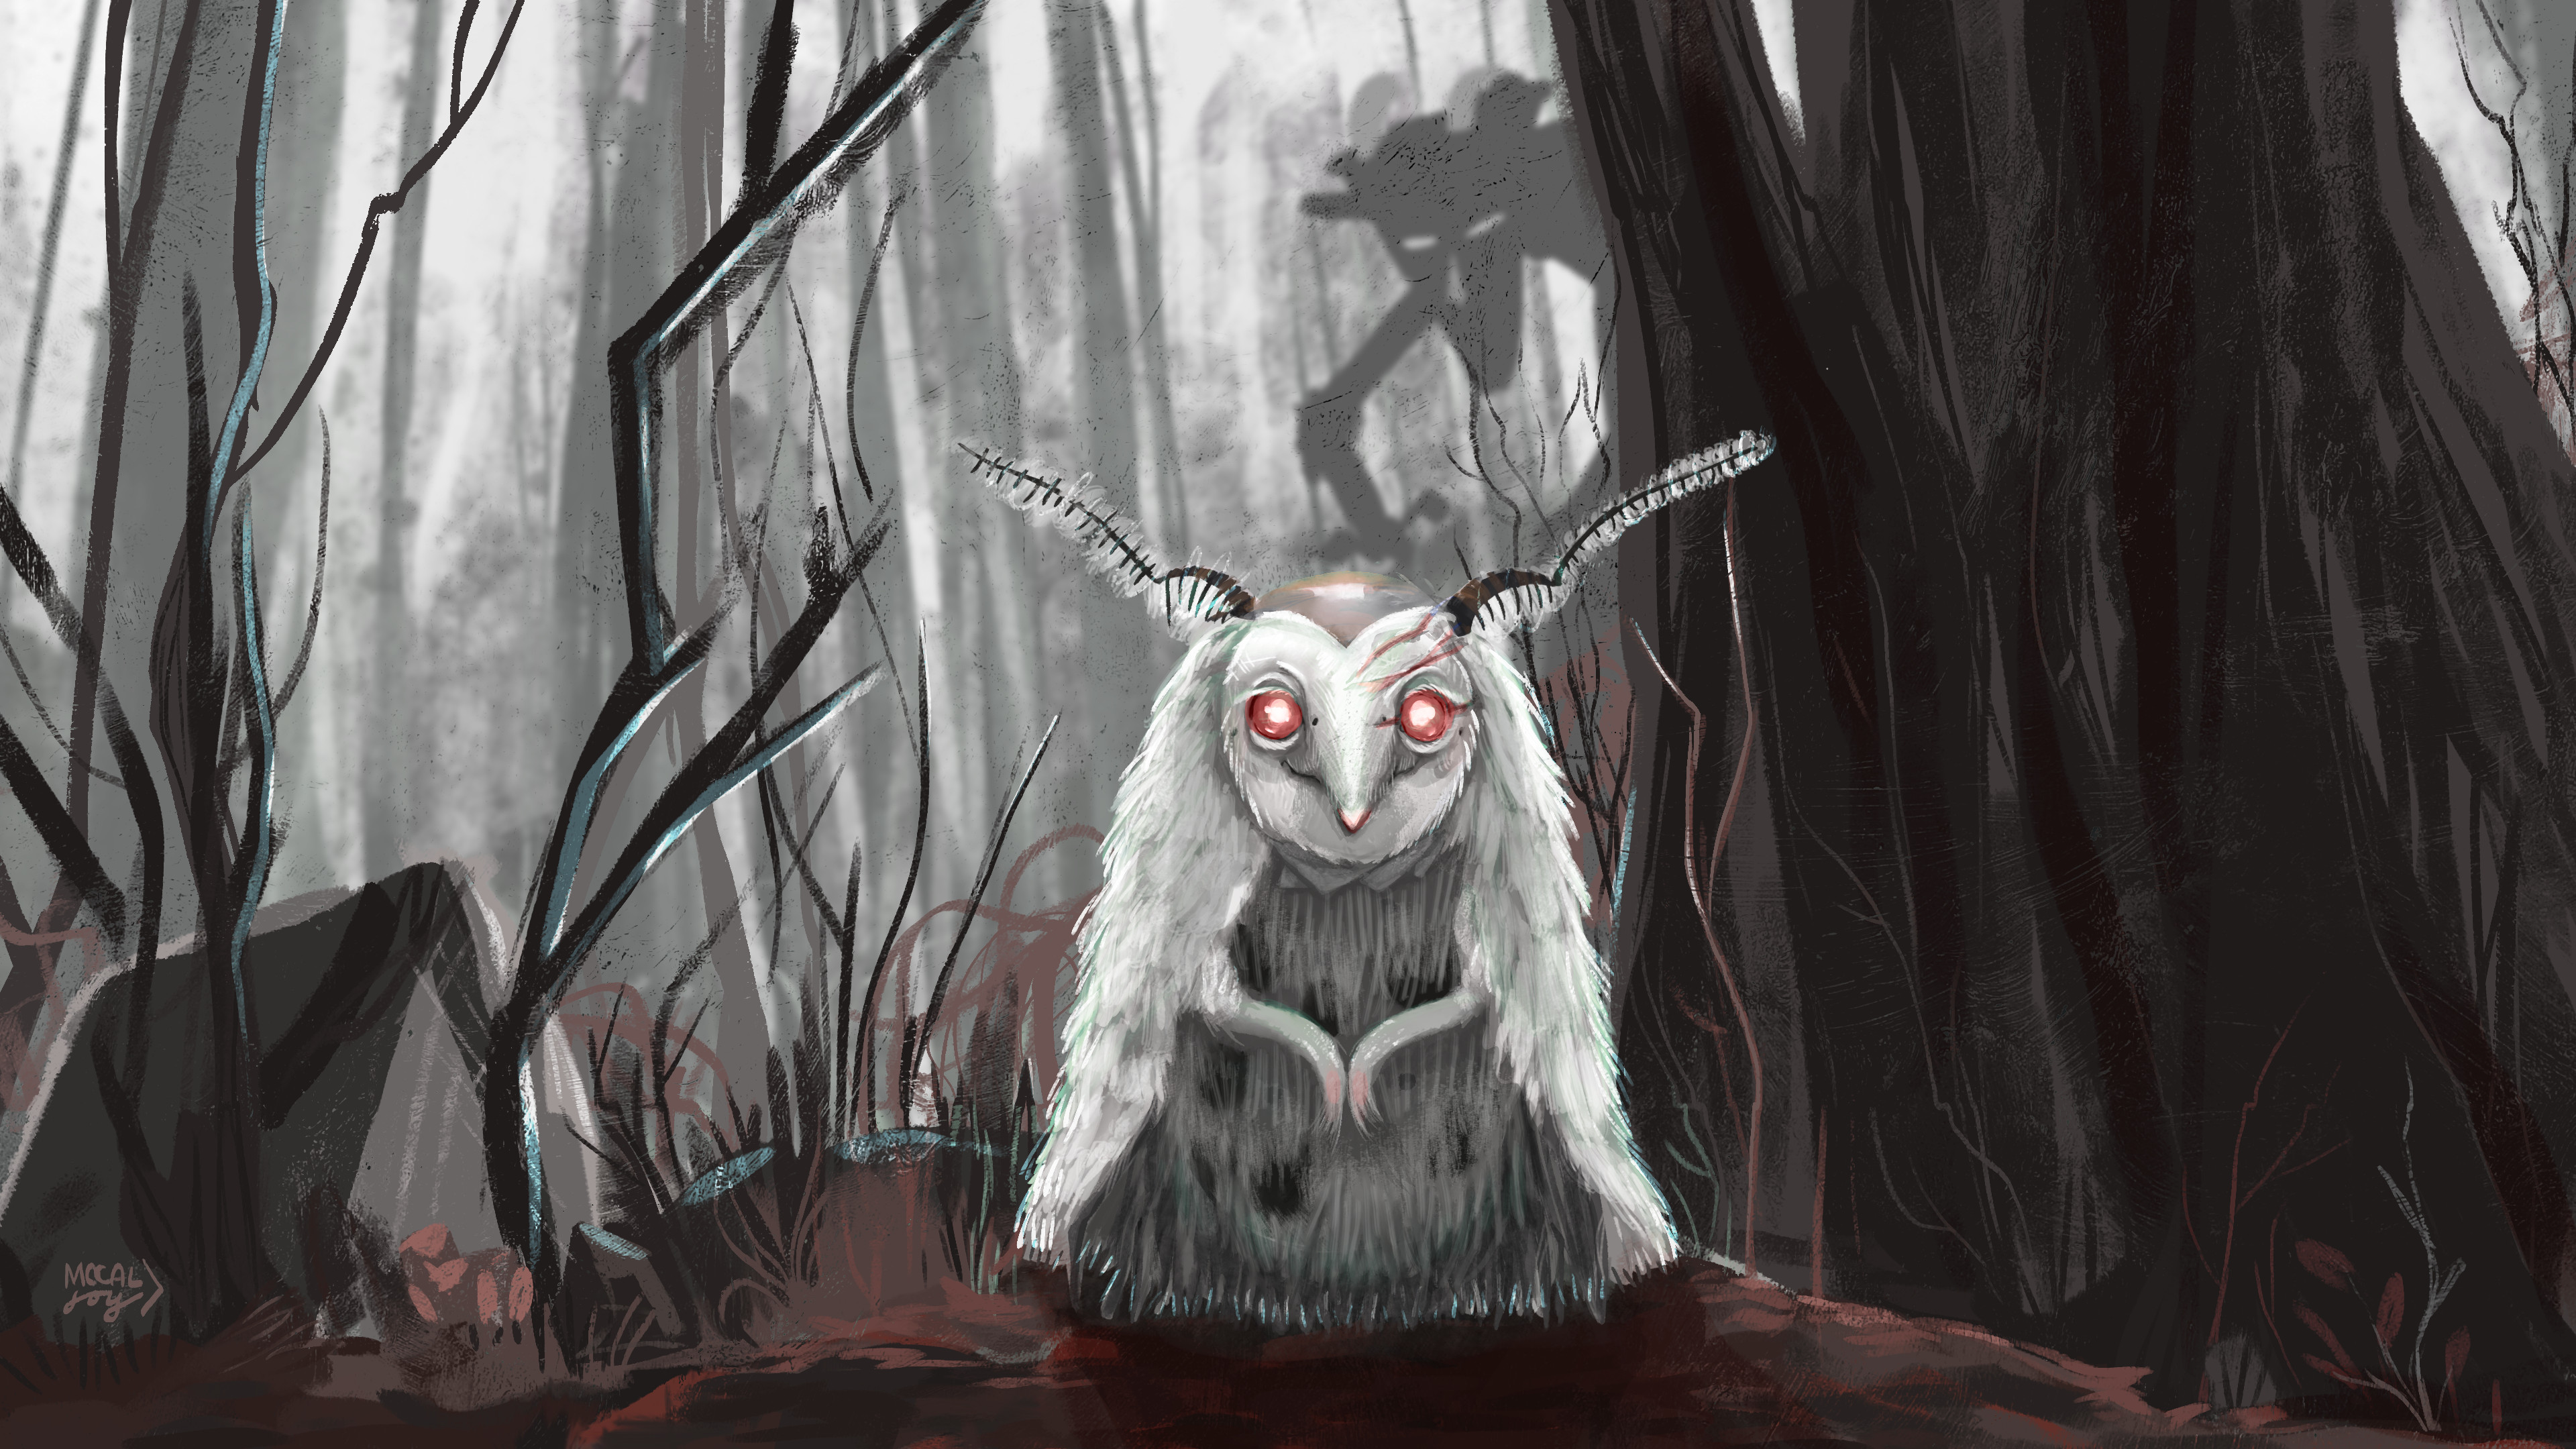 Creature 01, or Poo, as I've been calling her. Painted into her forest realm where she was born out of.